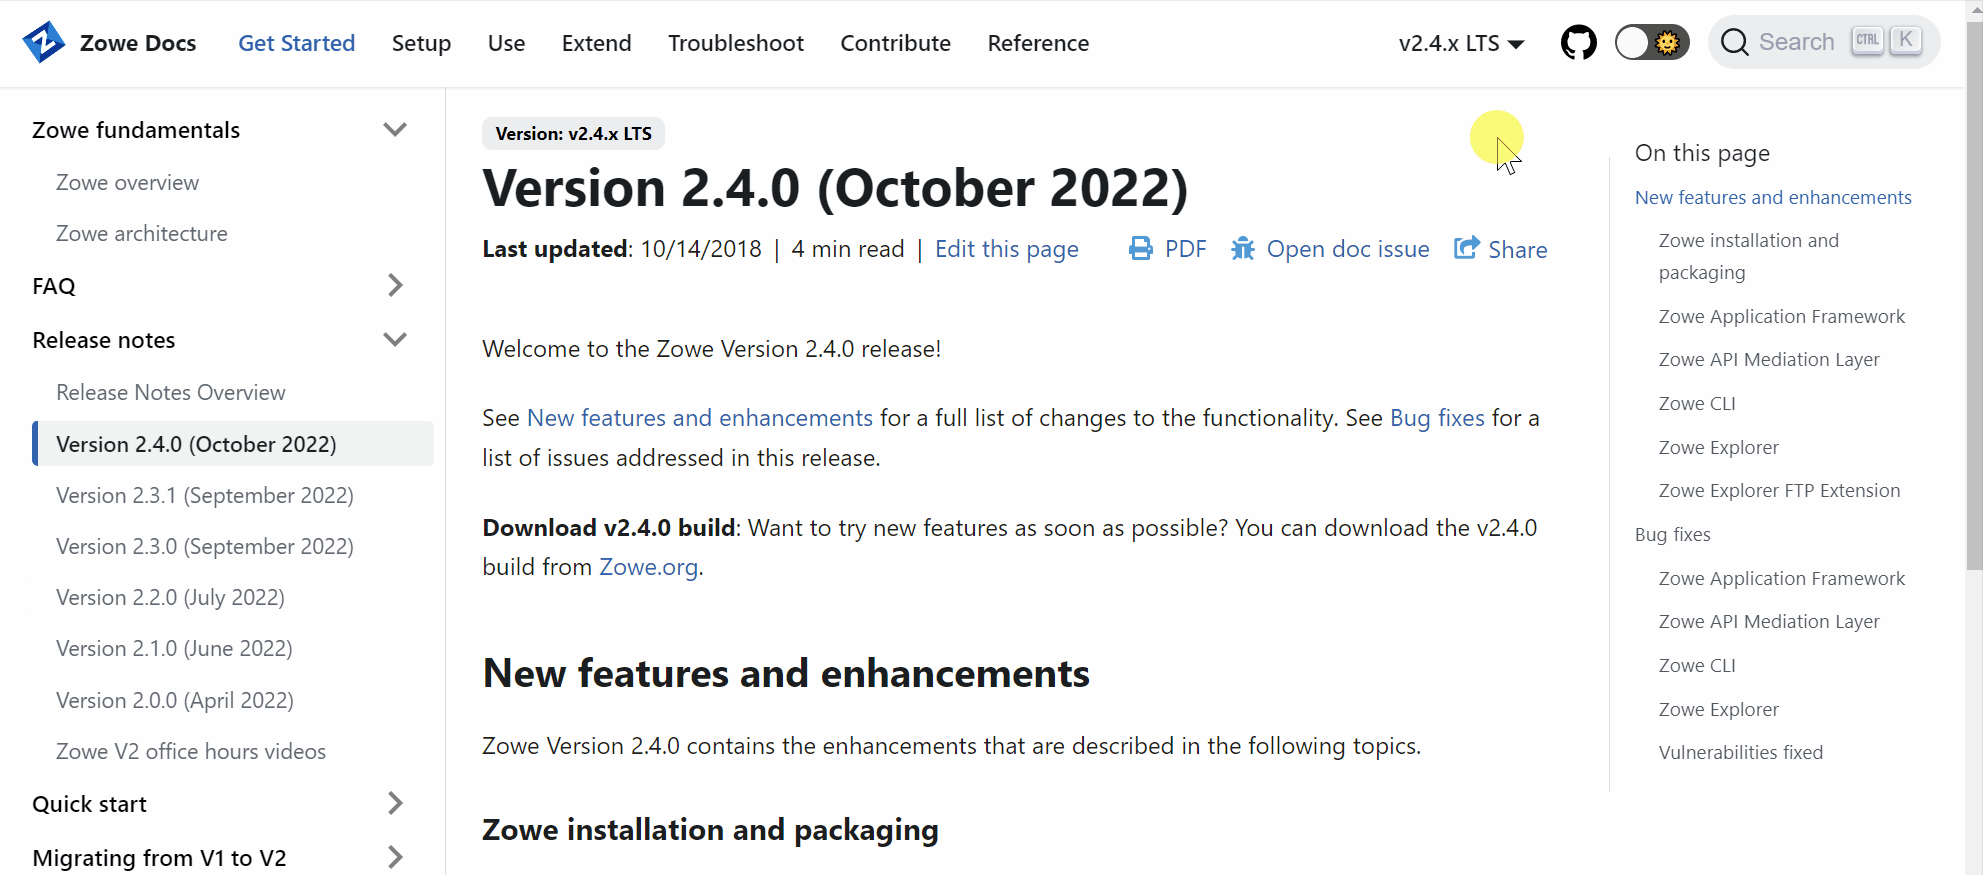 Viewing older release notes